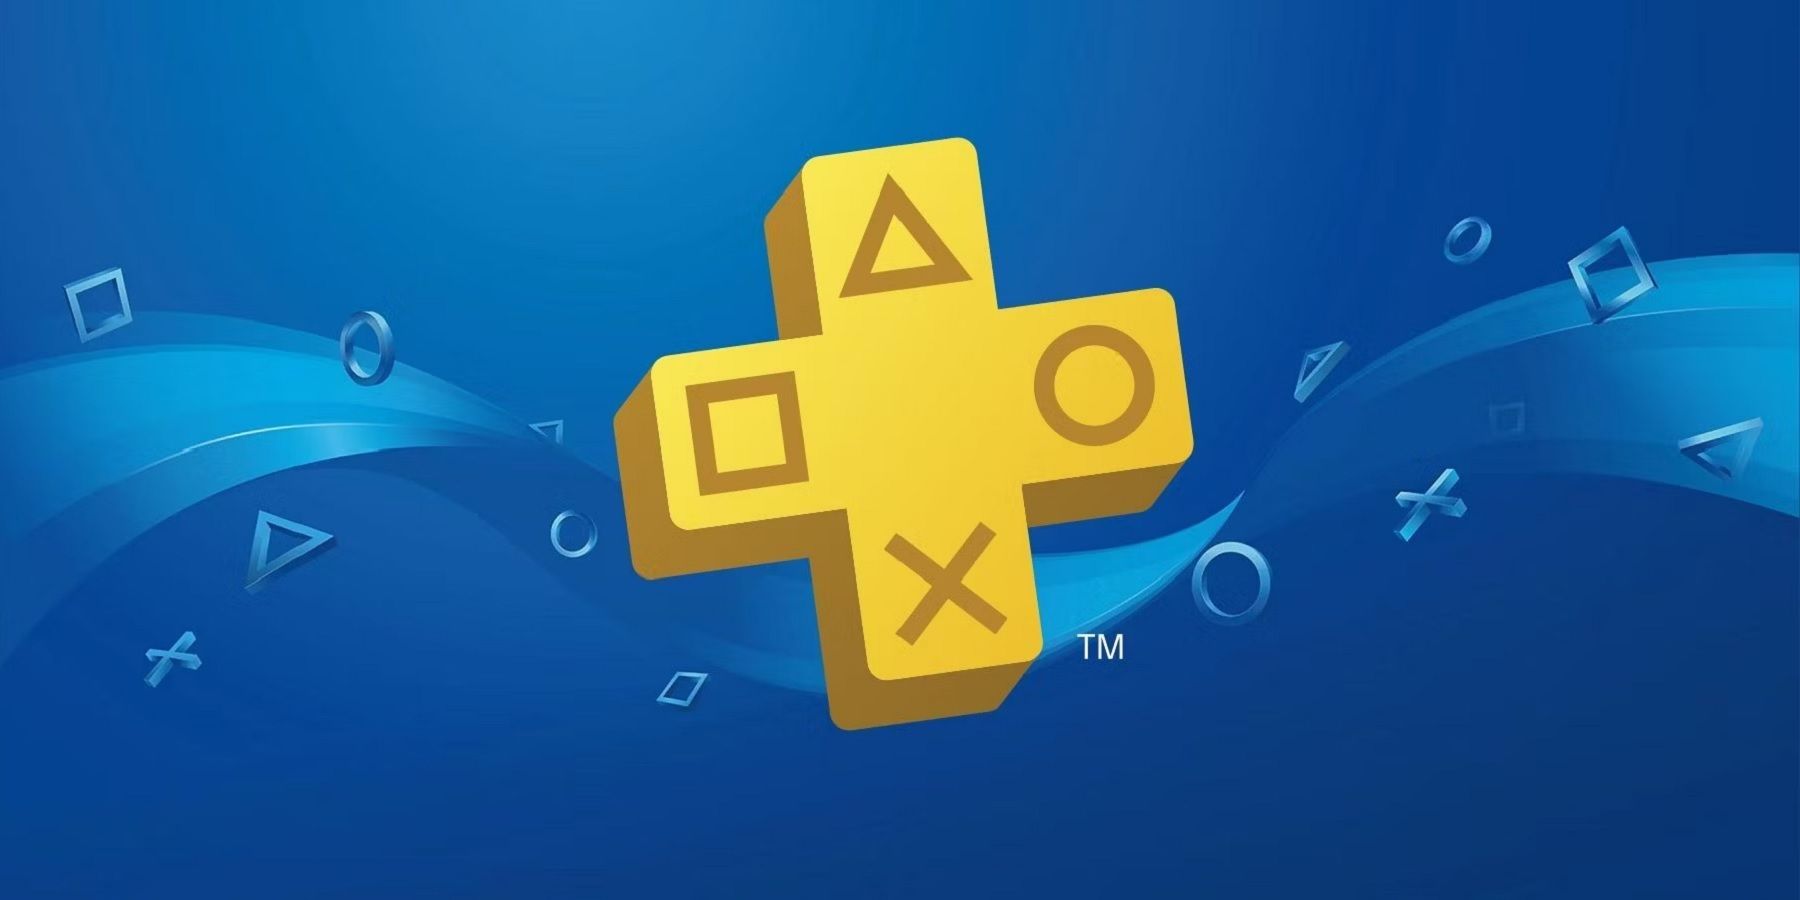 PlayStation Plus Essential September 2022 Titles Include Need for